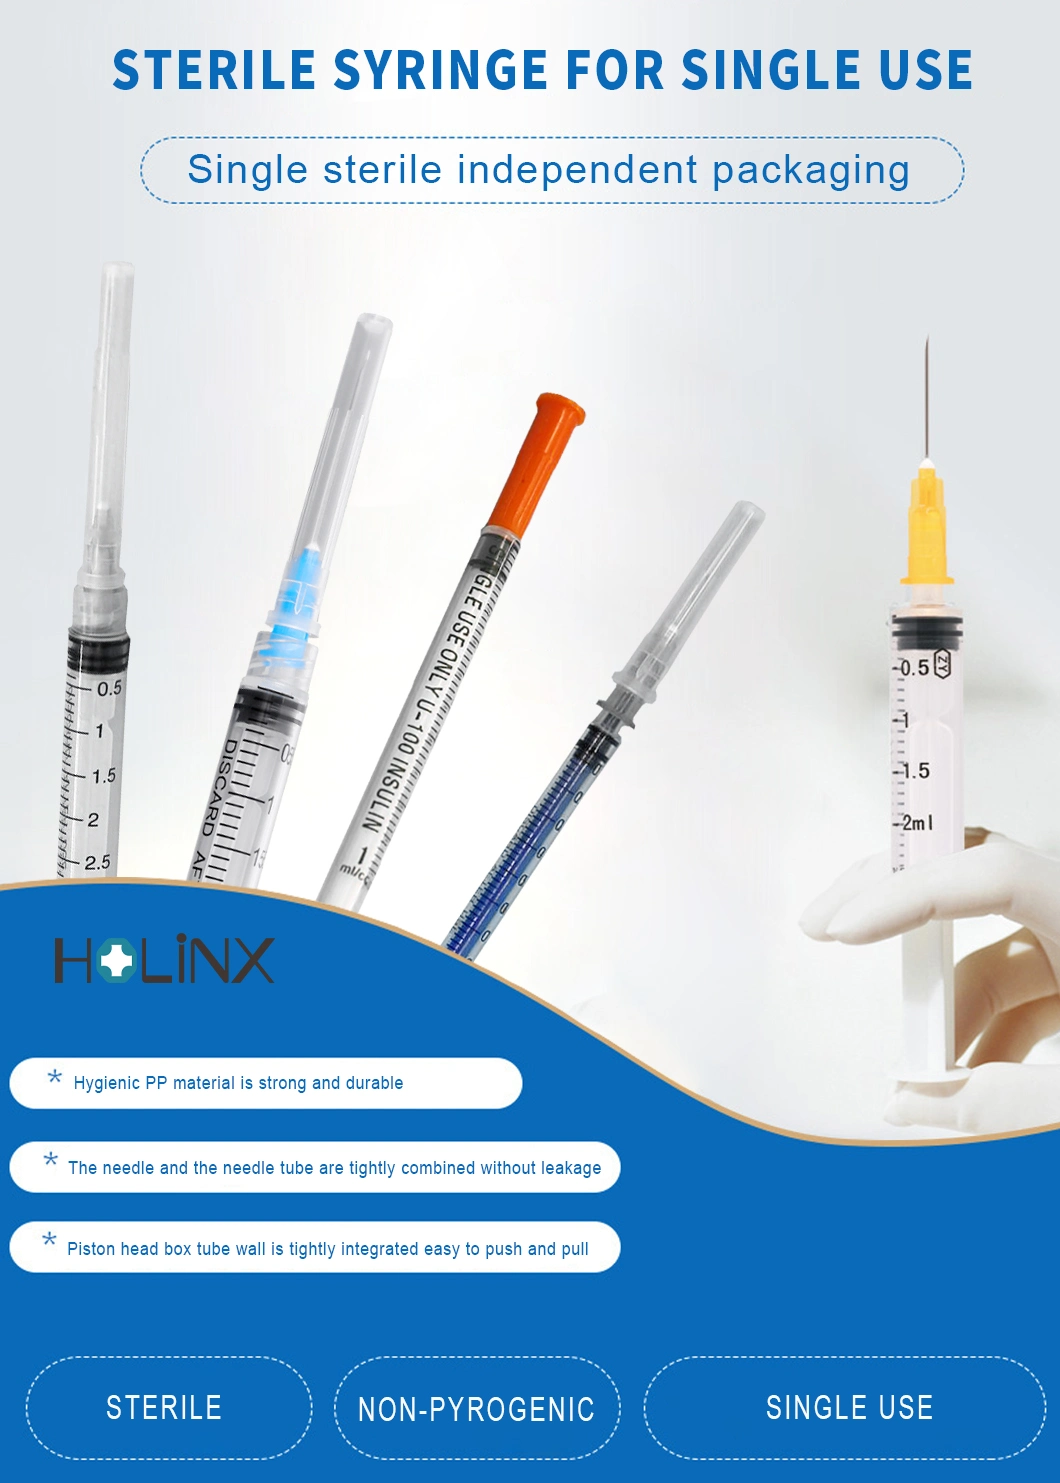 Steroid Irrigation Insulin Disposable Safety Plastic Medical Oral Syringe for Single Use Only 5ml